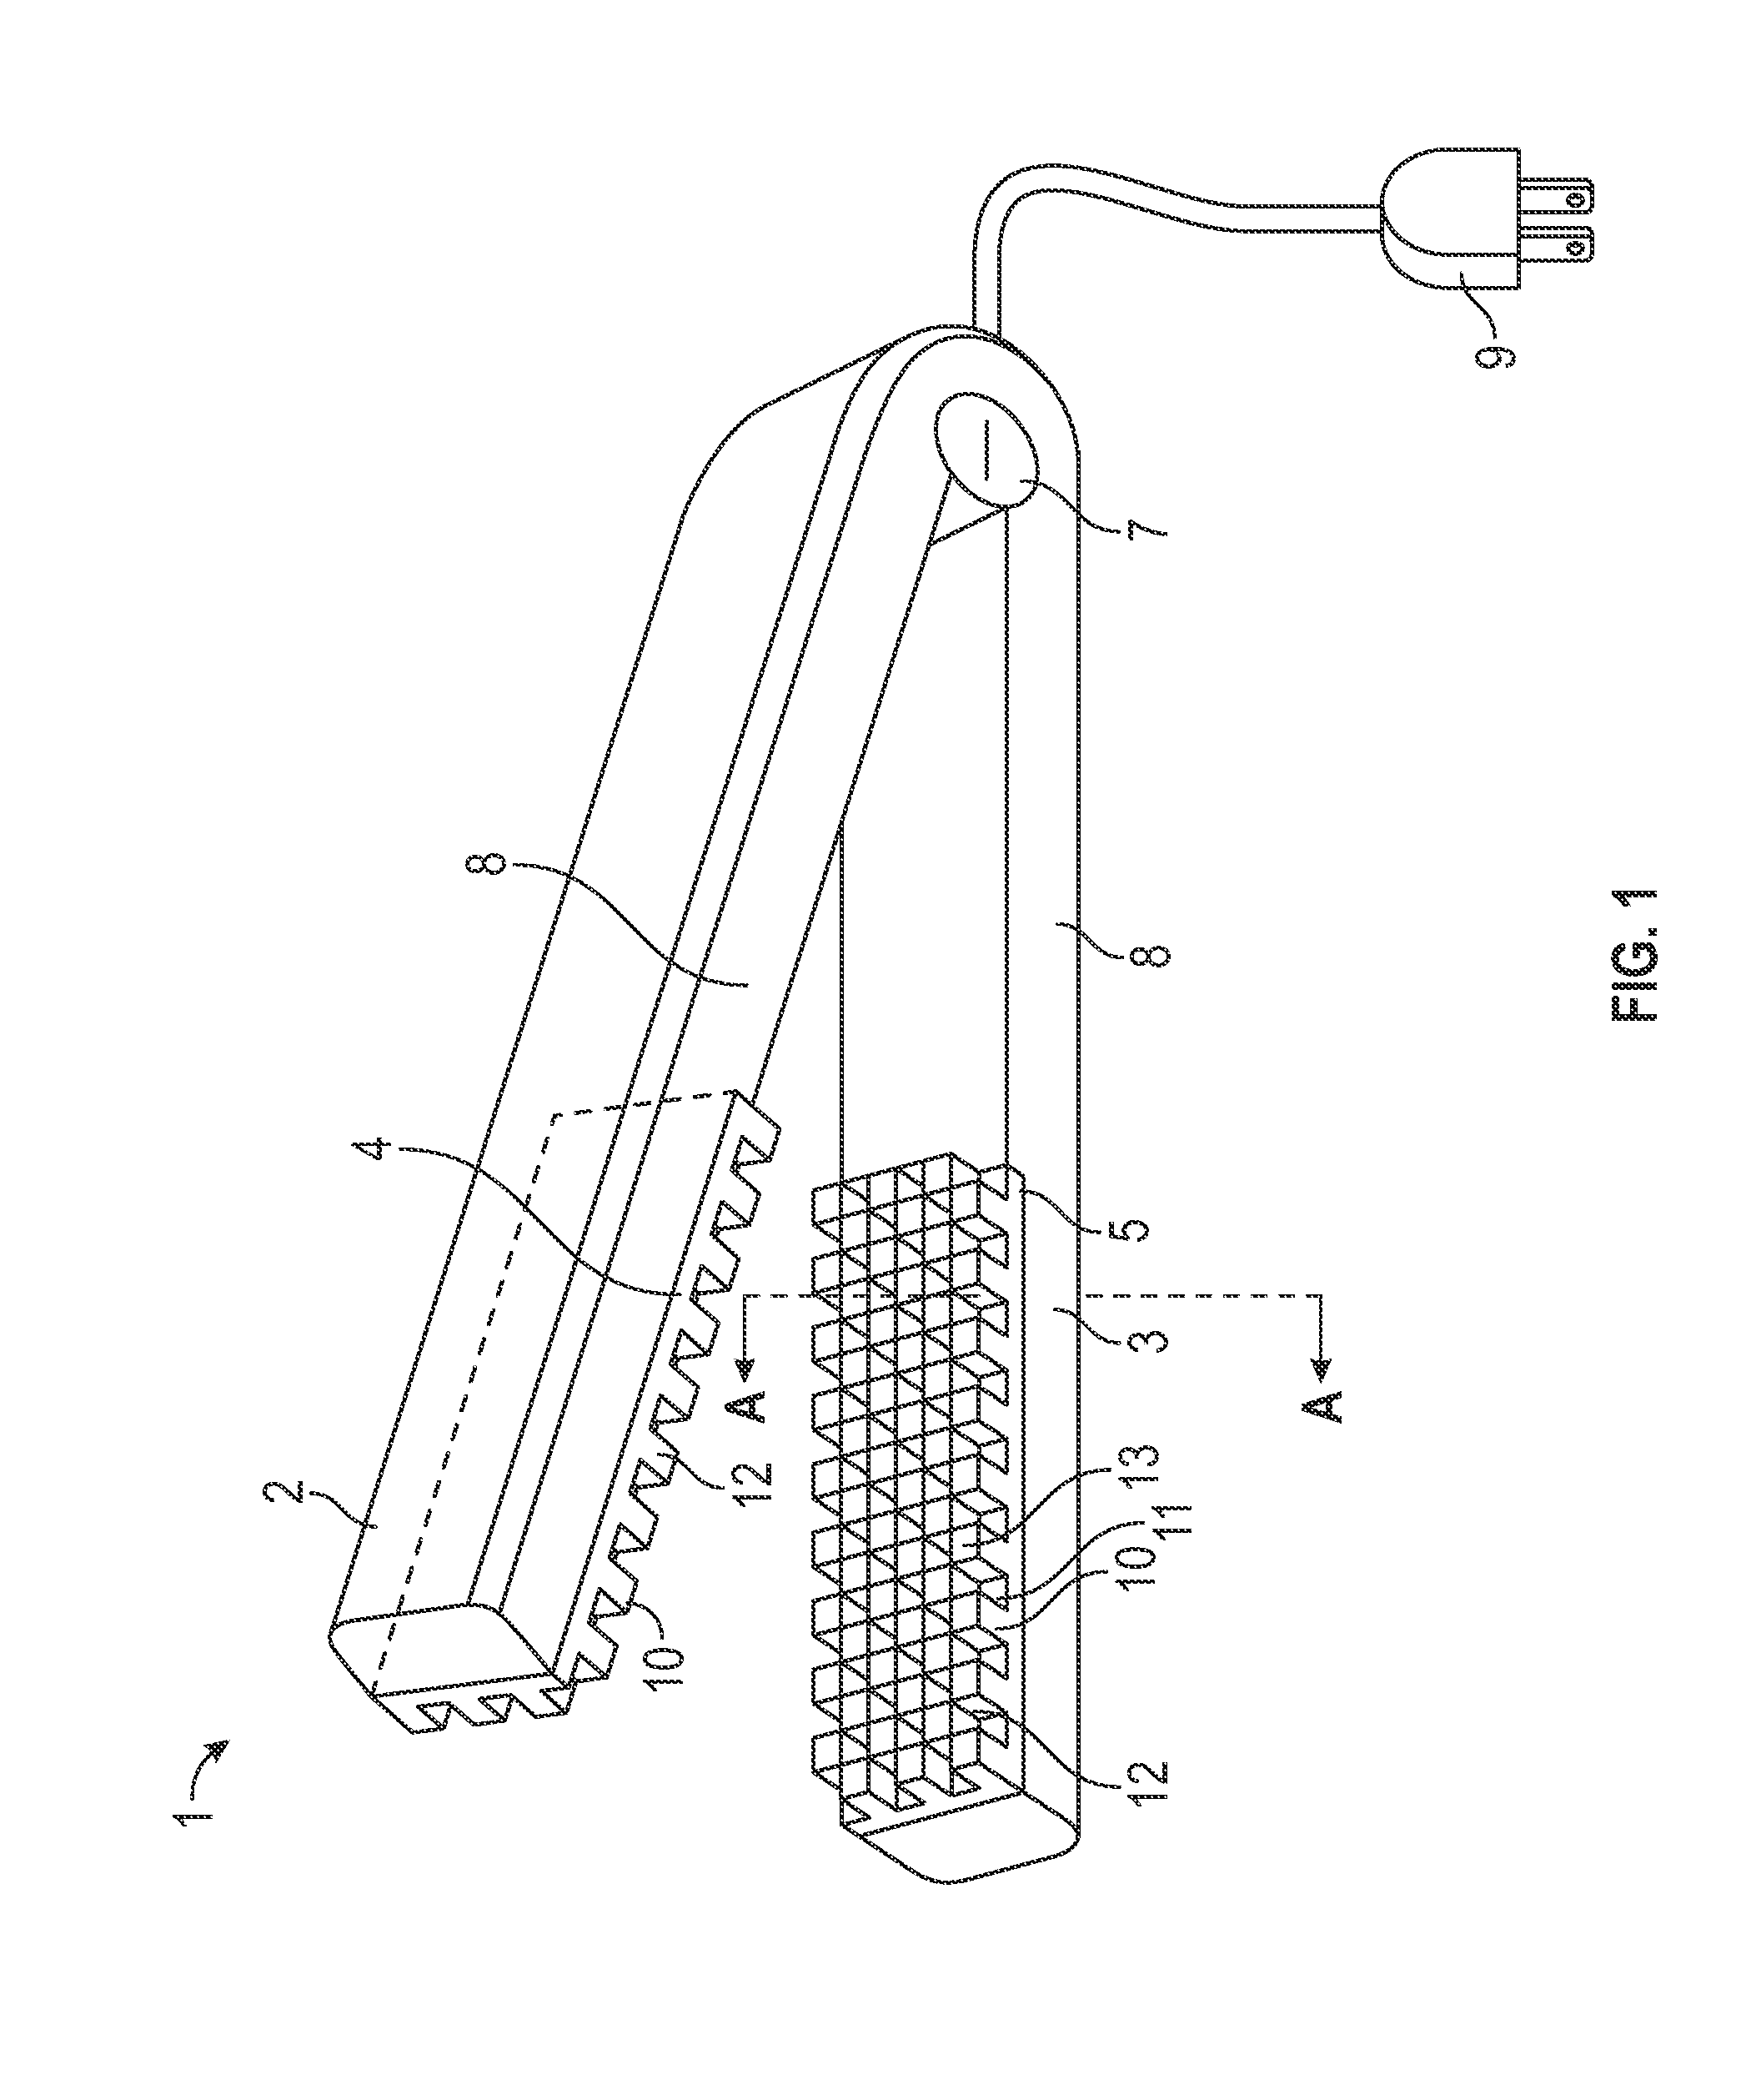 Hair volumizing device that utilizes individual treatment elements without leaving a visible pattern